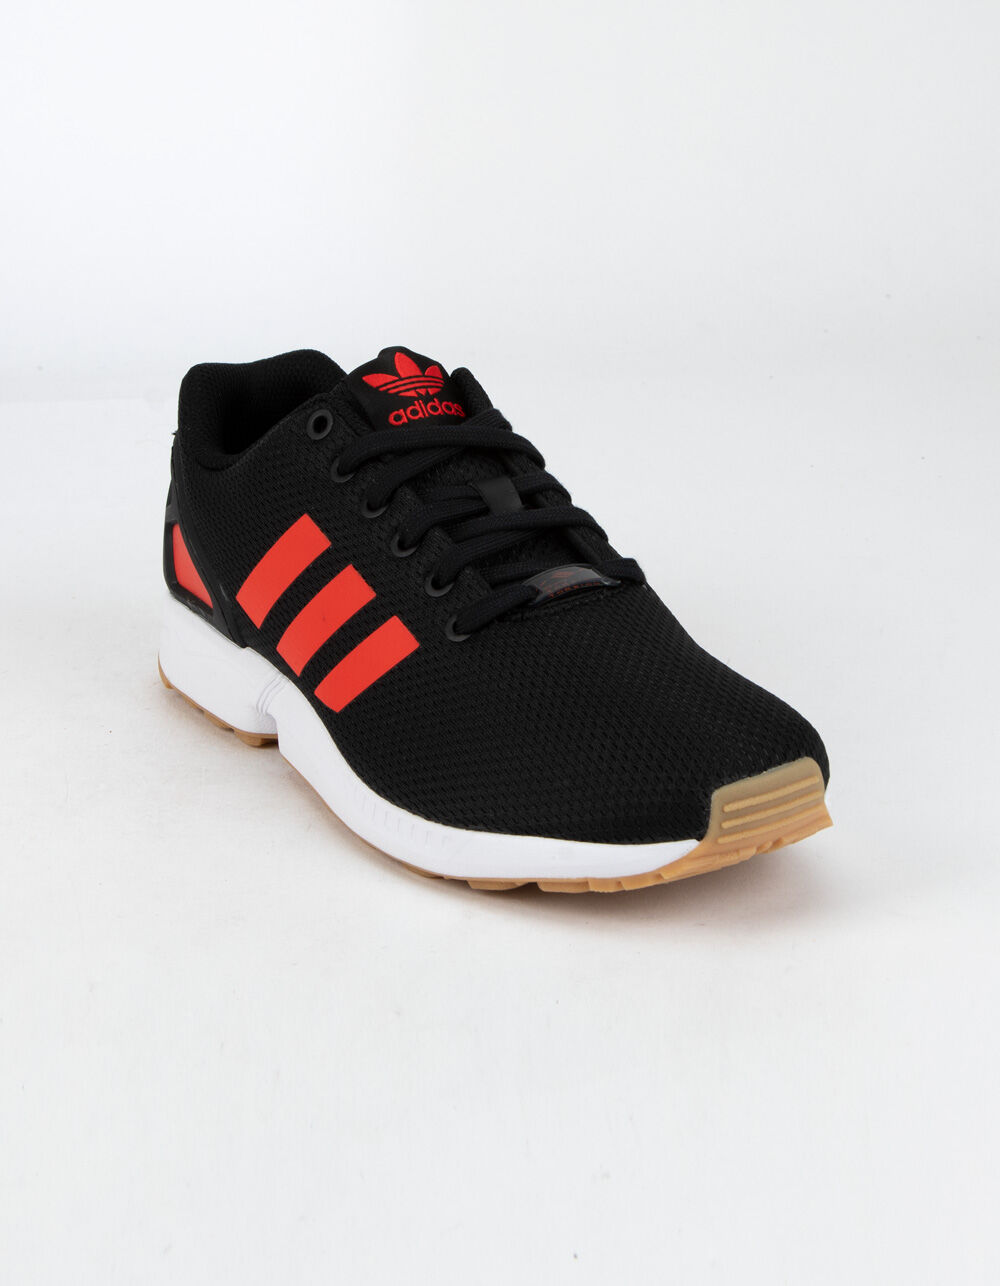 ADIDAS ZX Flux Black & Red Shoes image number 1